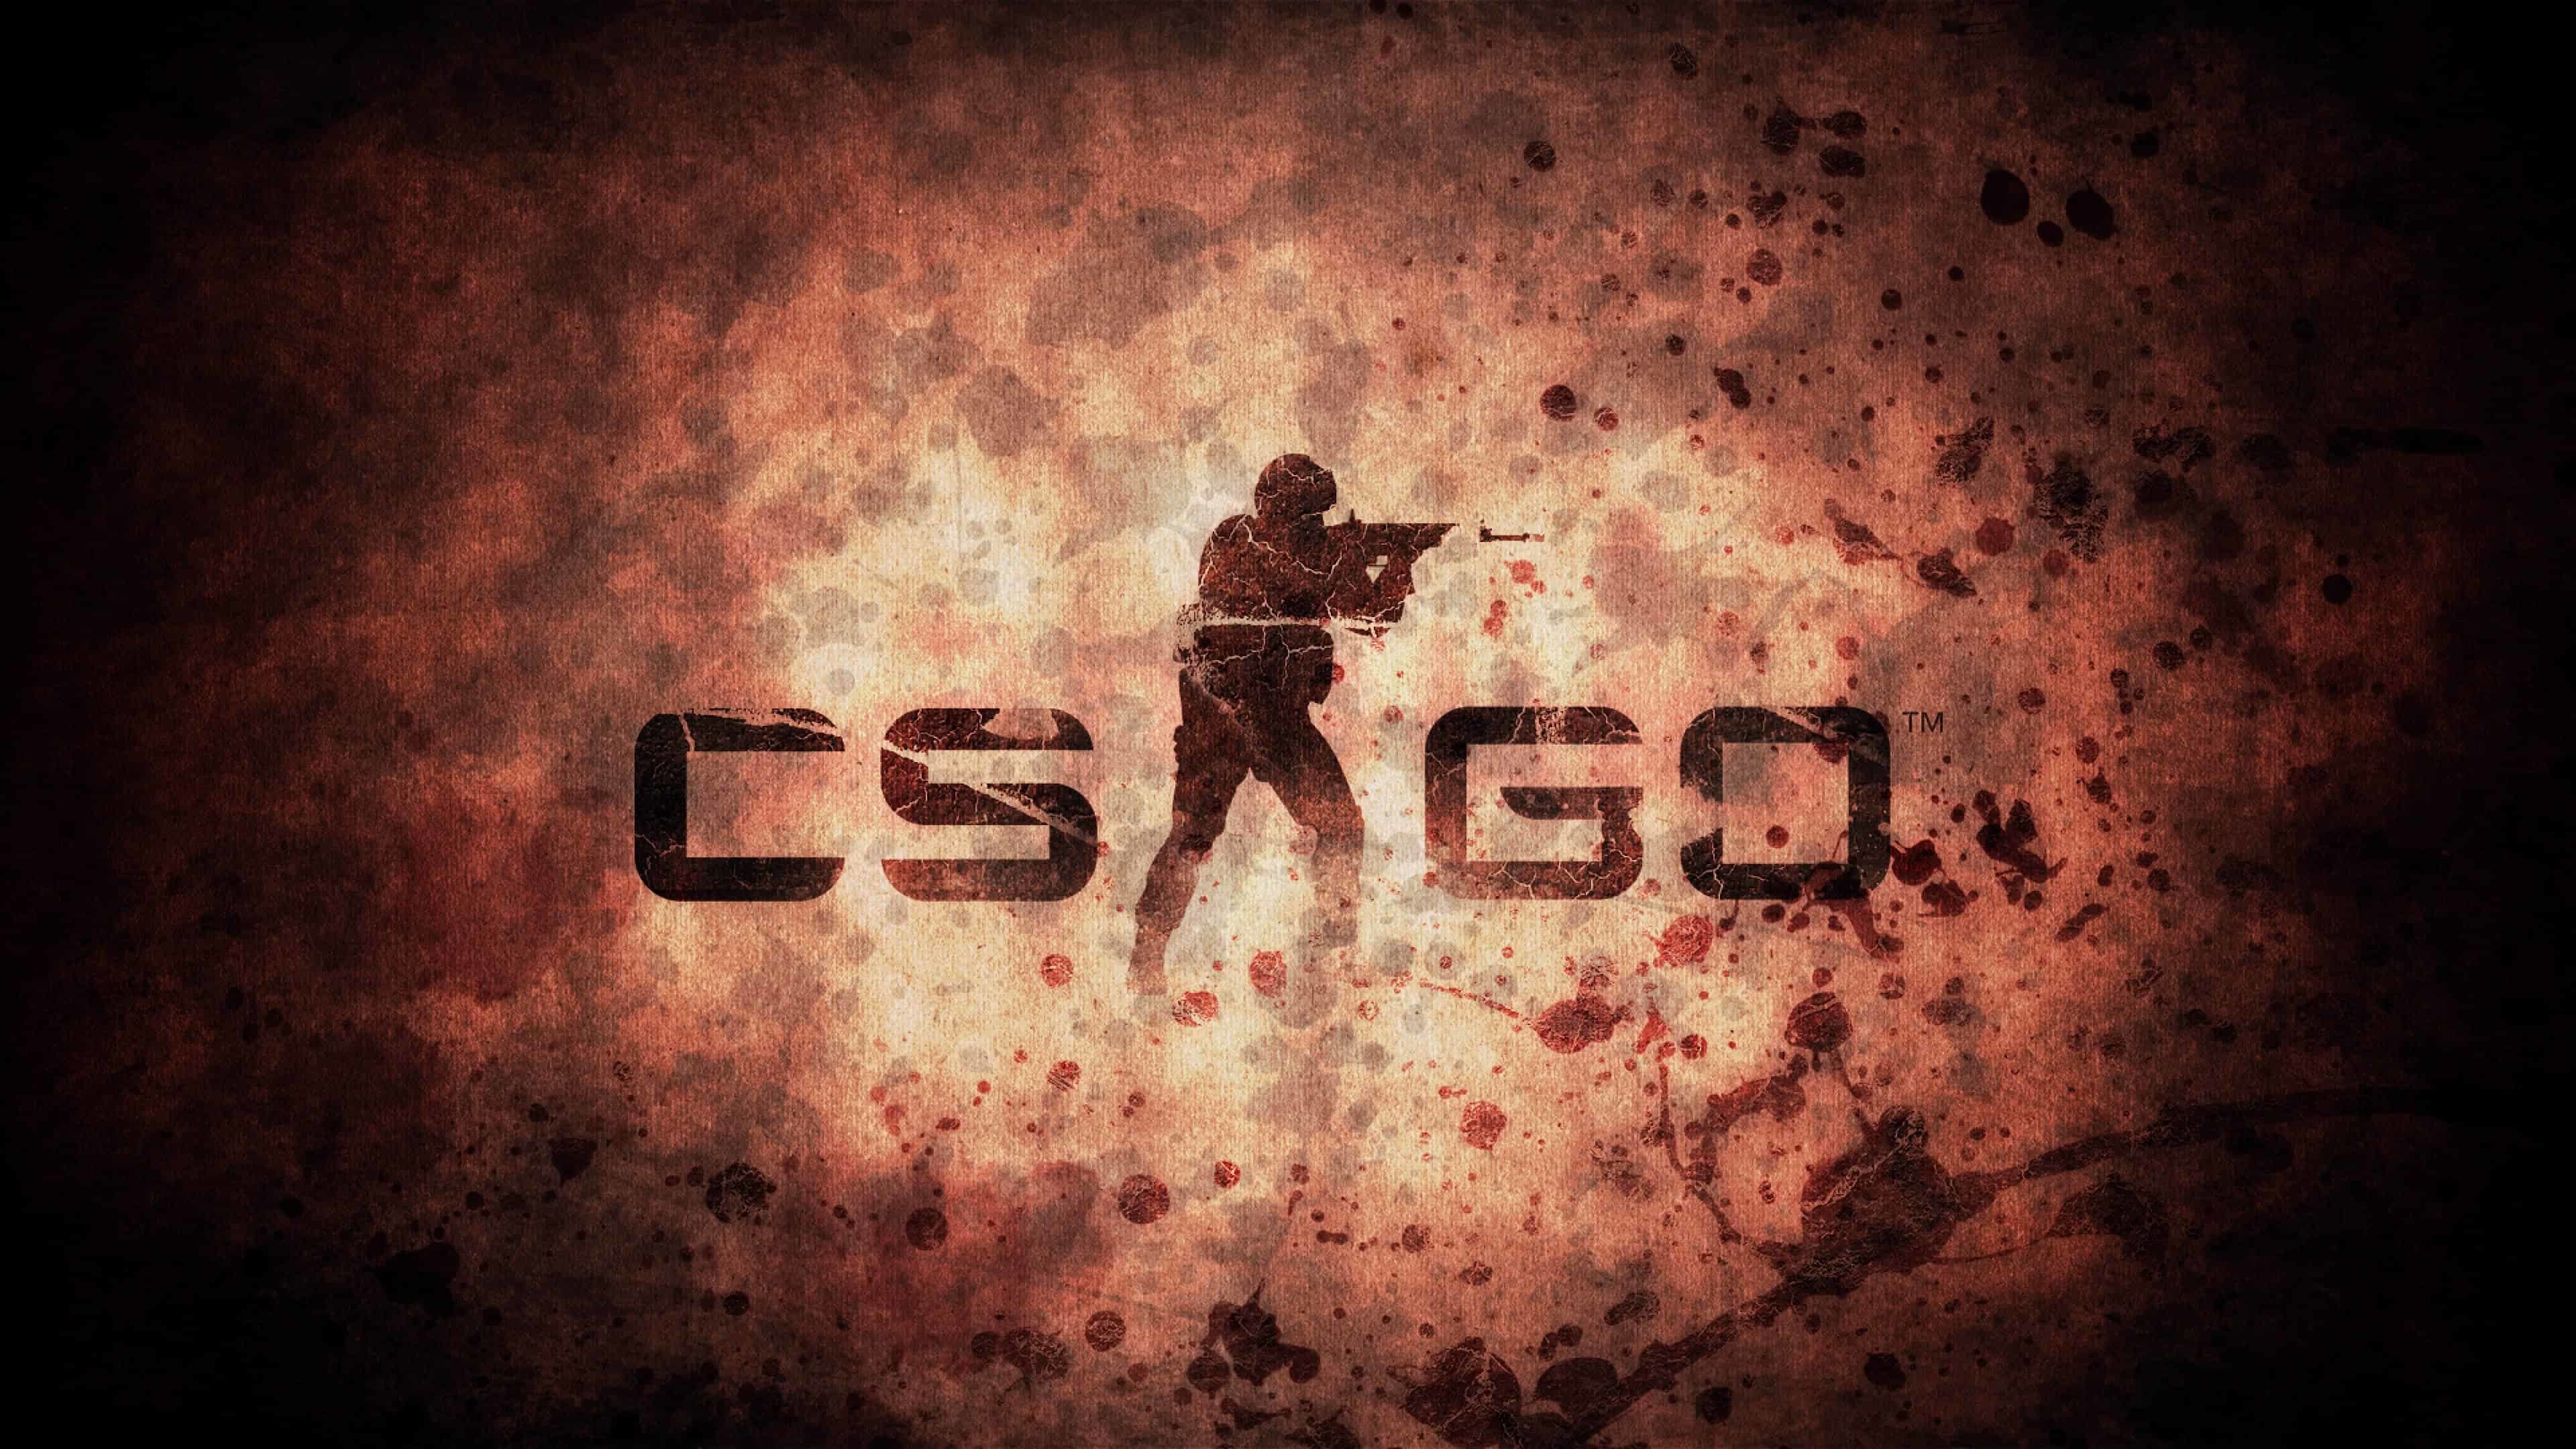 3840x2160 1600x900 101 CS:GO HD Wallpapers: Cool Gaming Backgrounds">